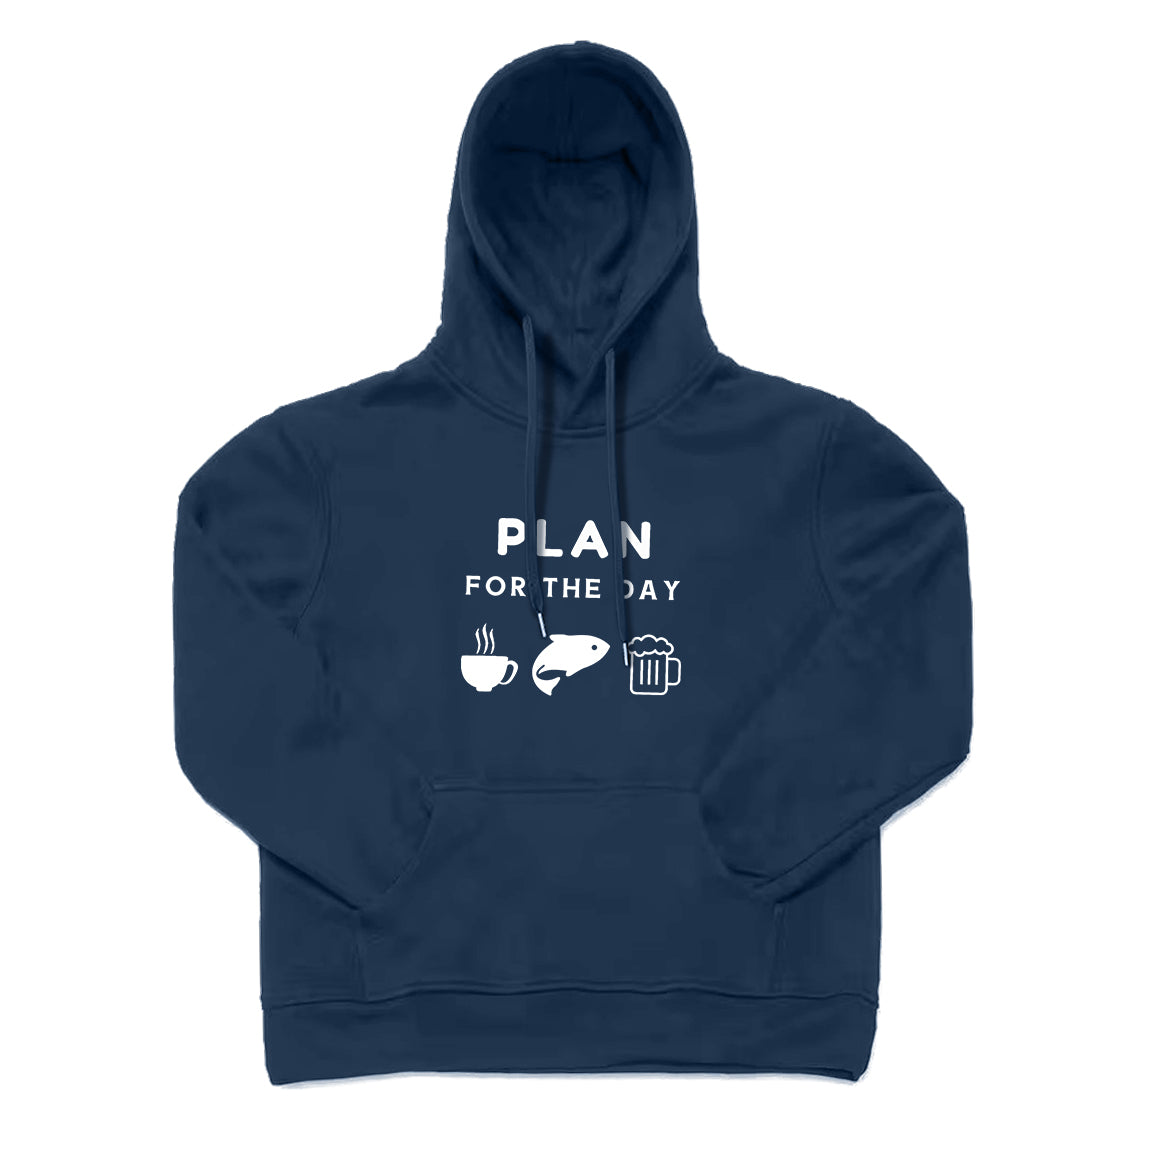 PLAN FOR THE DAY Hoodie